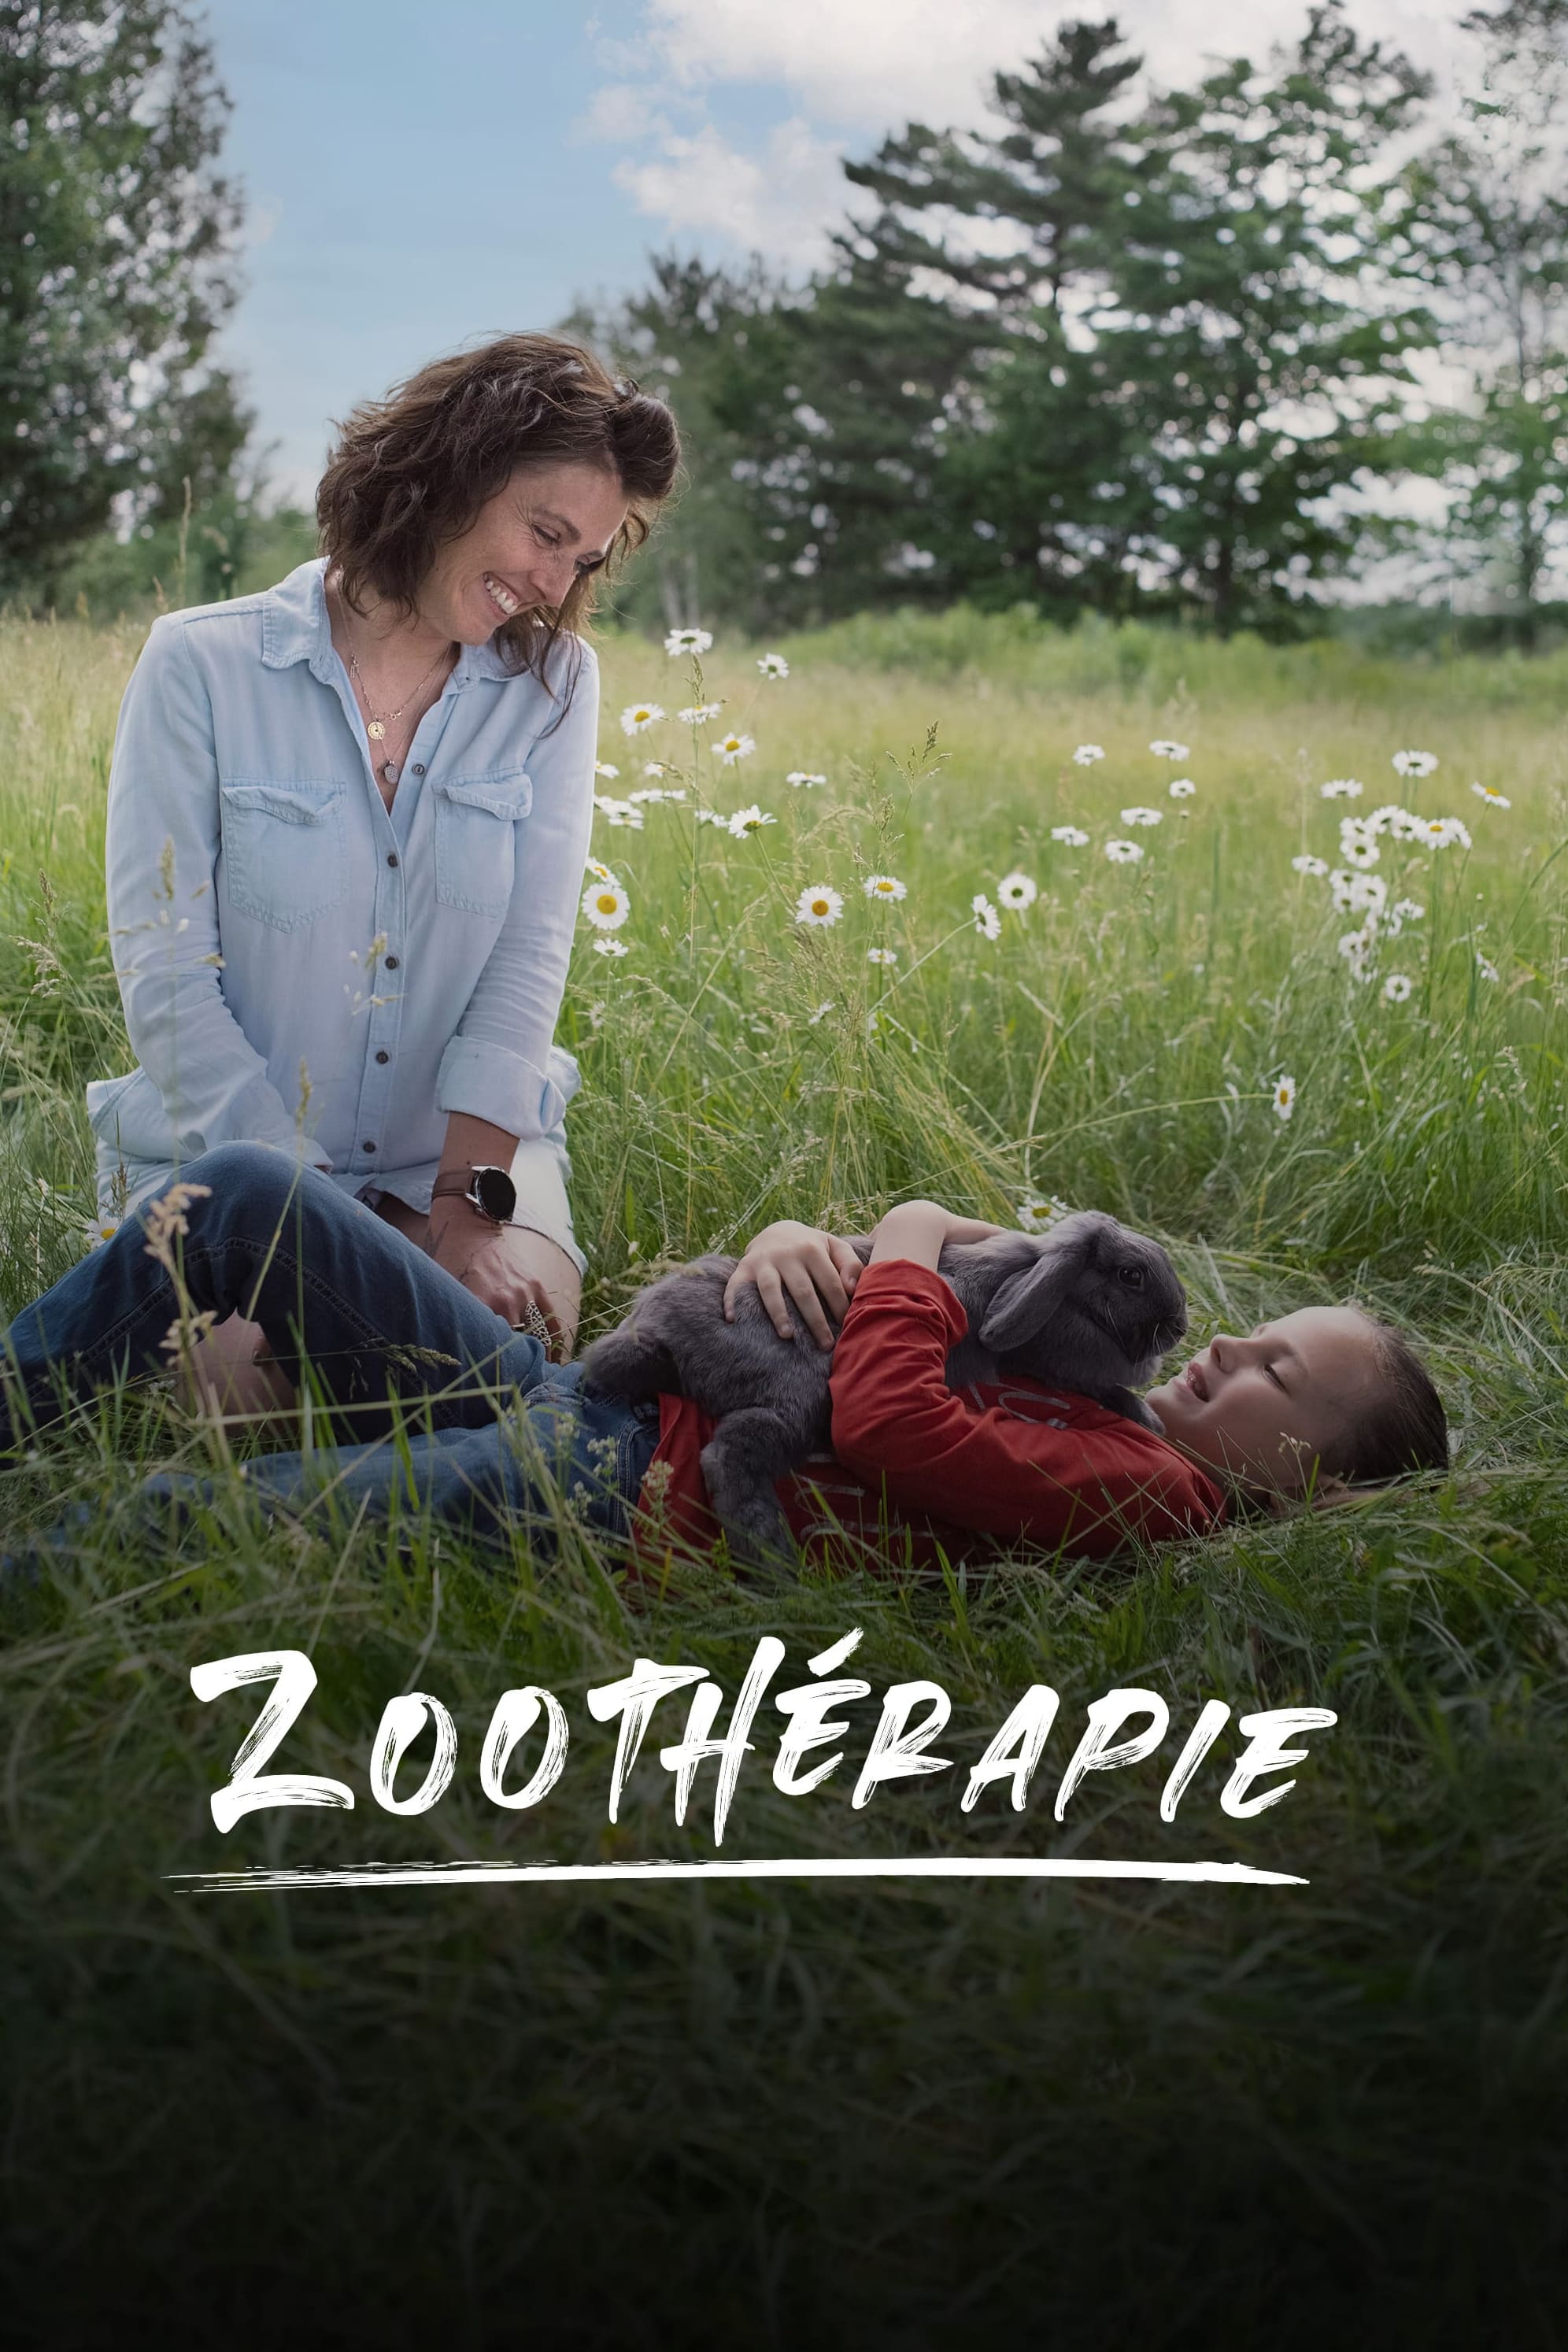 Zoothérapie TV Shows About Animal